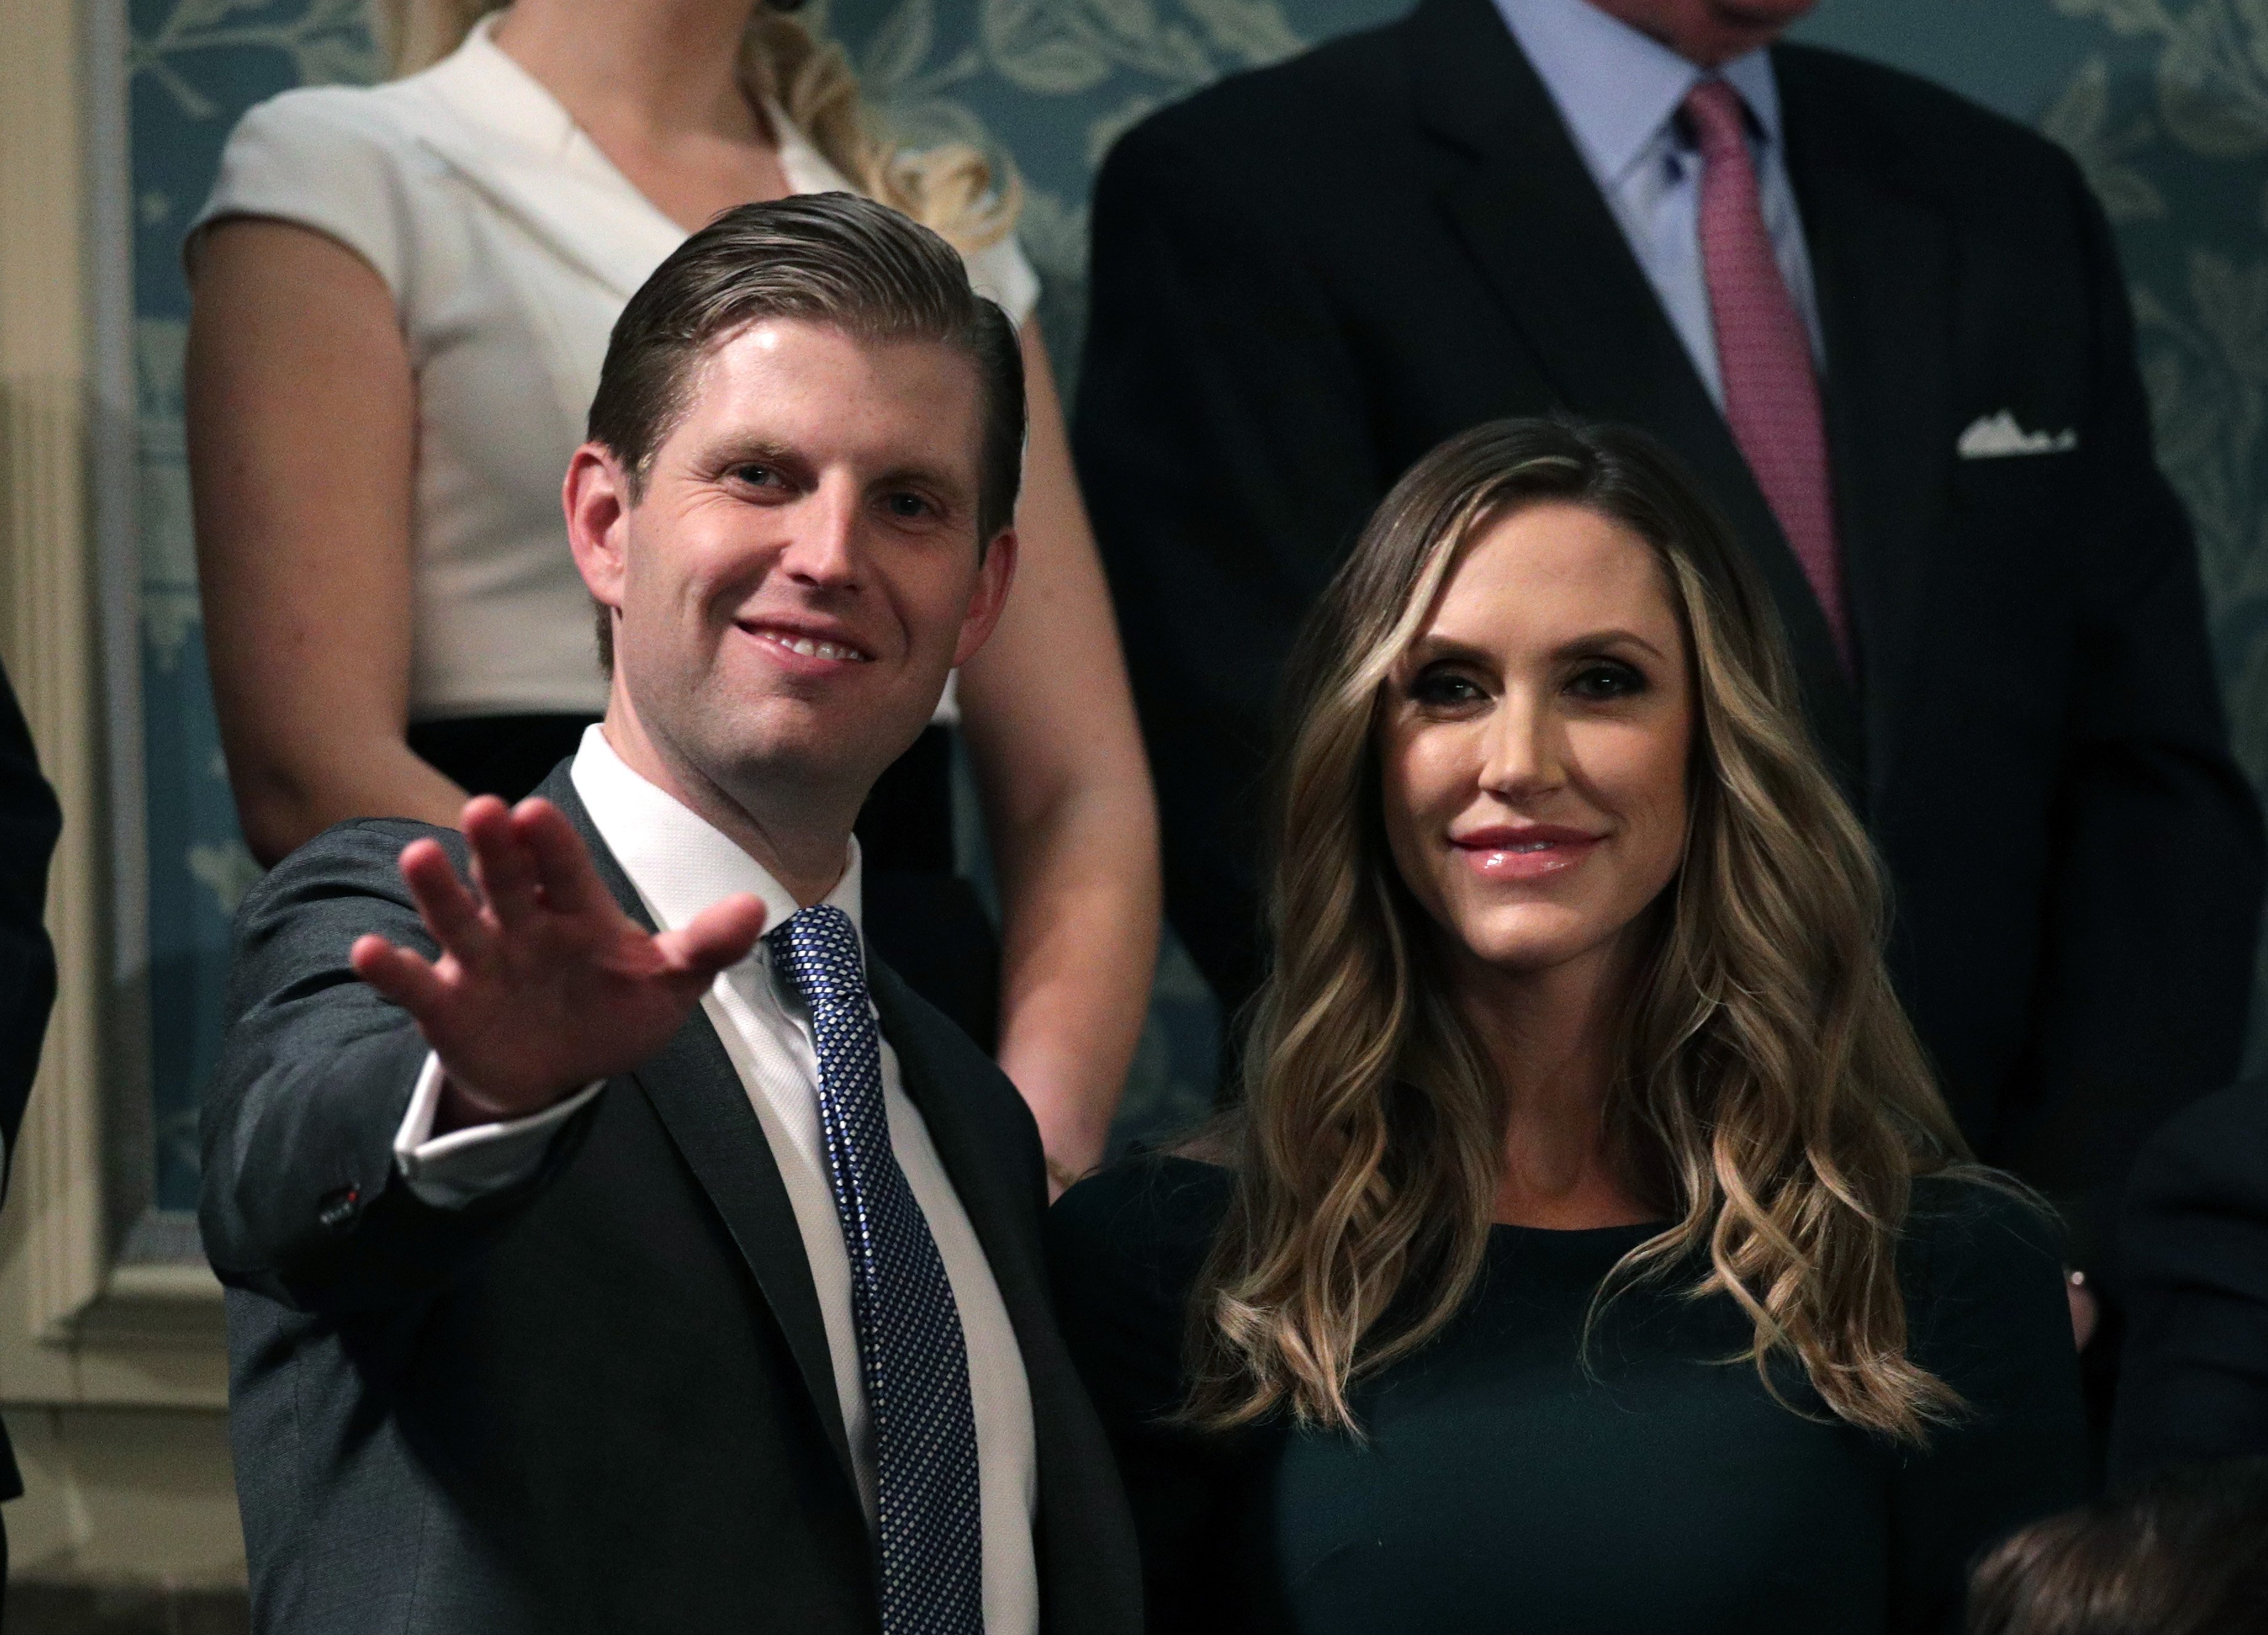 Eric Trump and Lara Trump attend the State of the Union address in the chamber of the U.S. House of Representatives January 30, 2018. | Photo: GettyImages